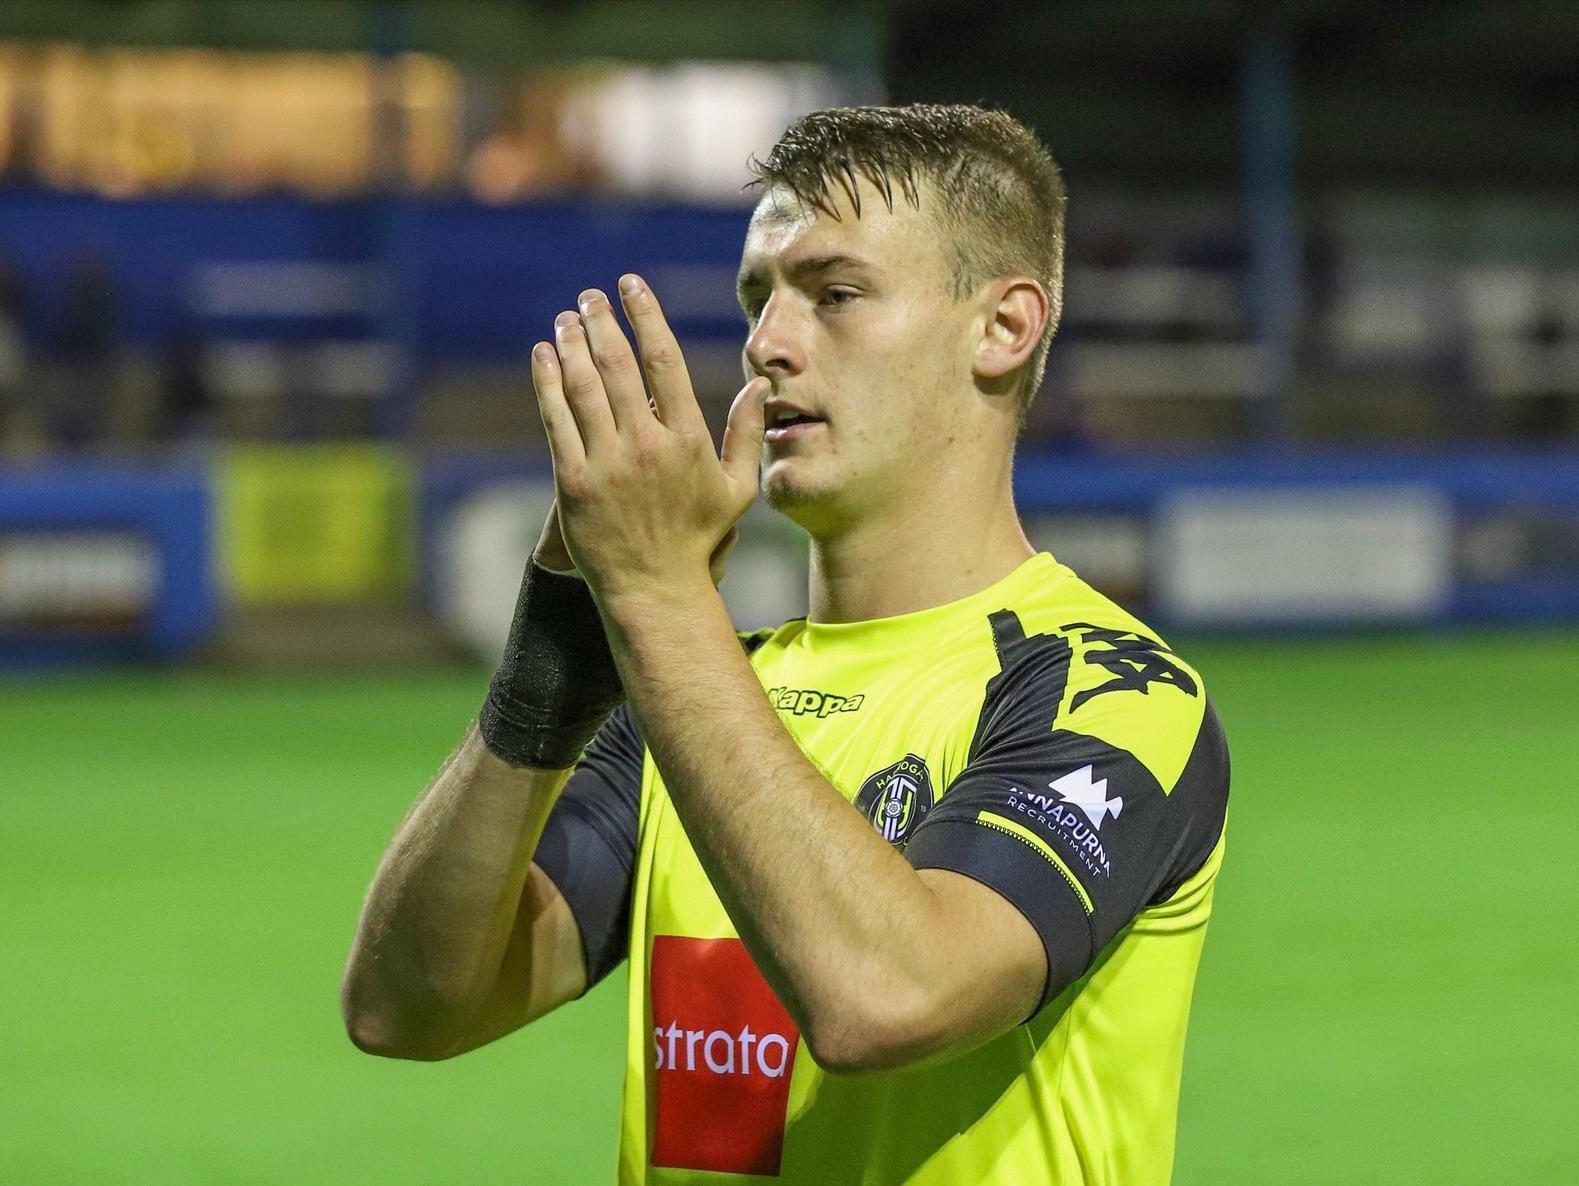 Will Smith 7. A pretty confident display. Didnt look out of place up against John Marquis, a striker who scored 21 goals in League One last term.